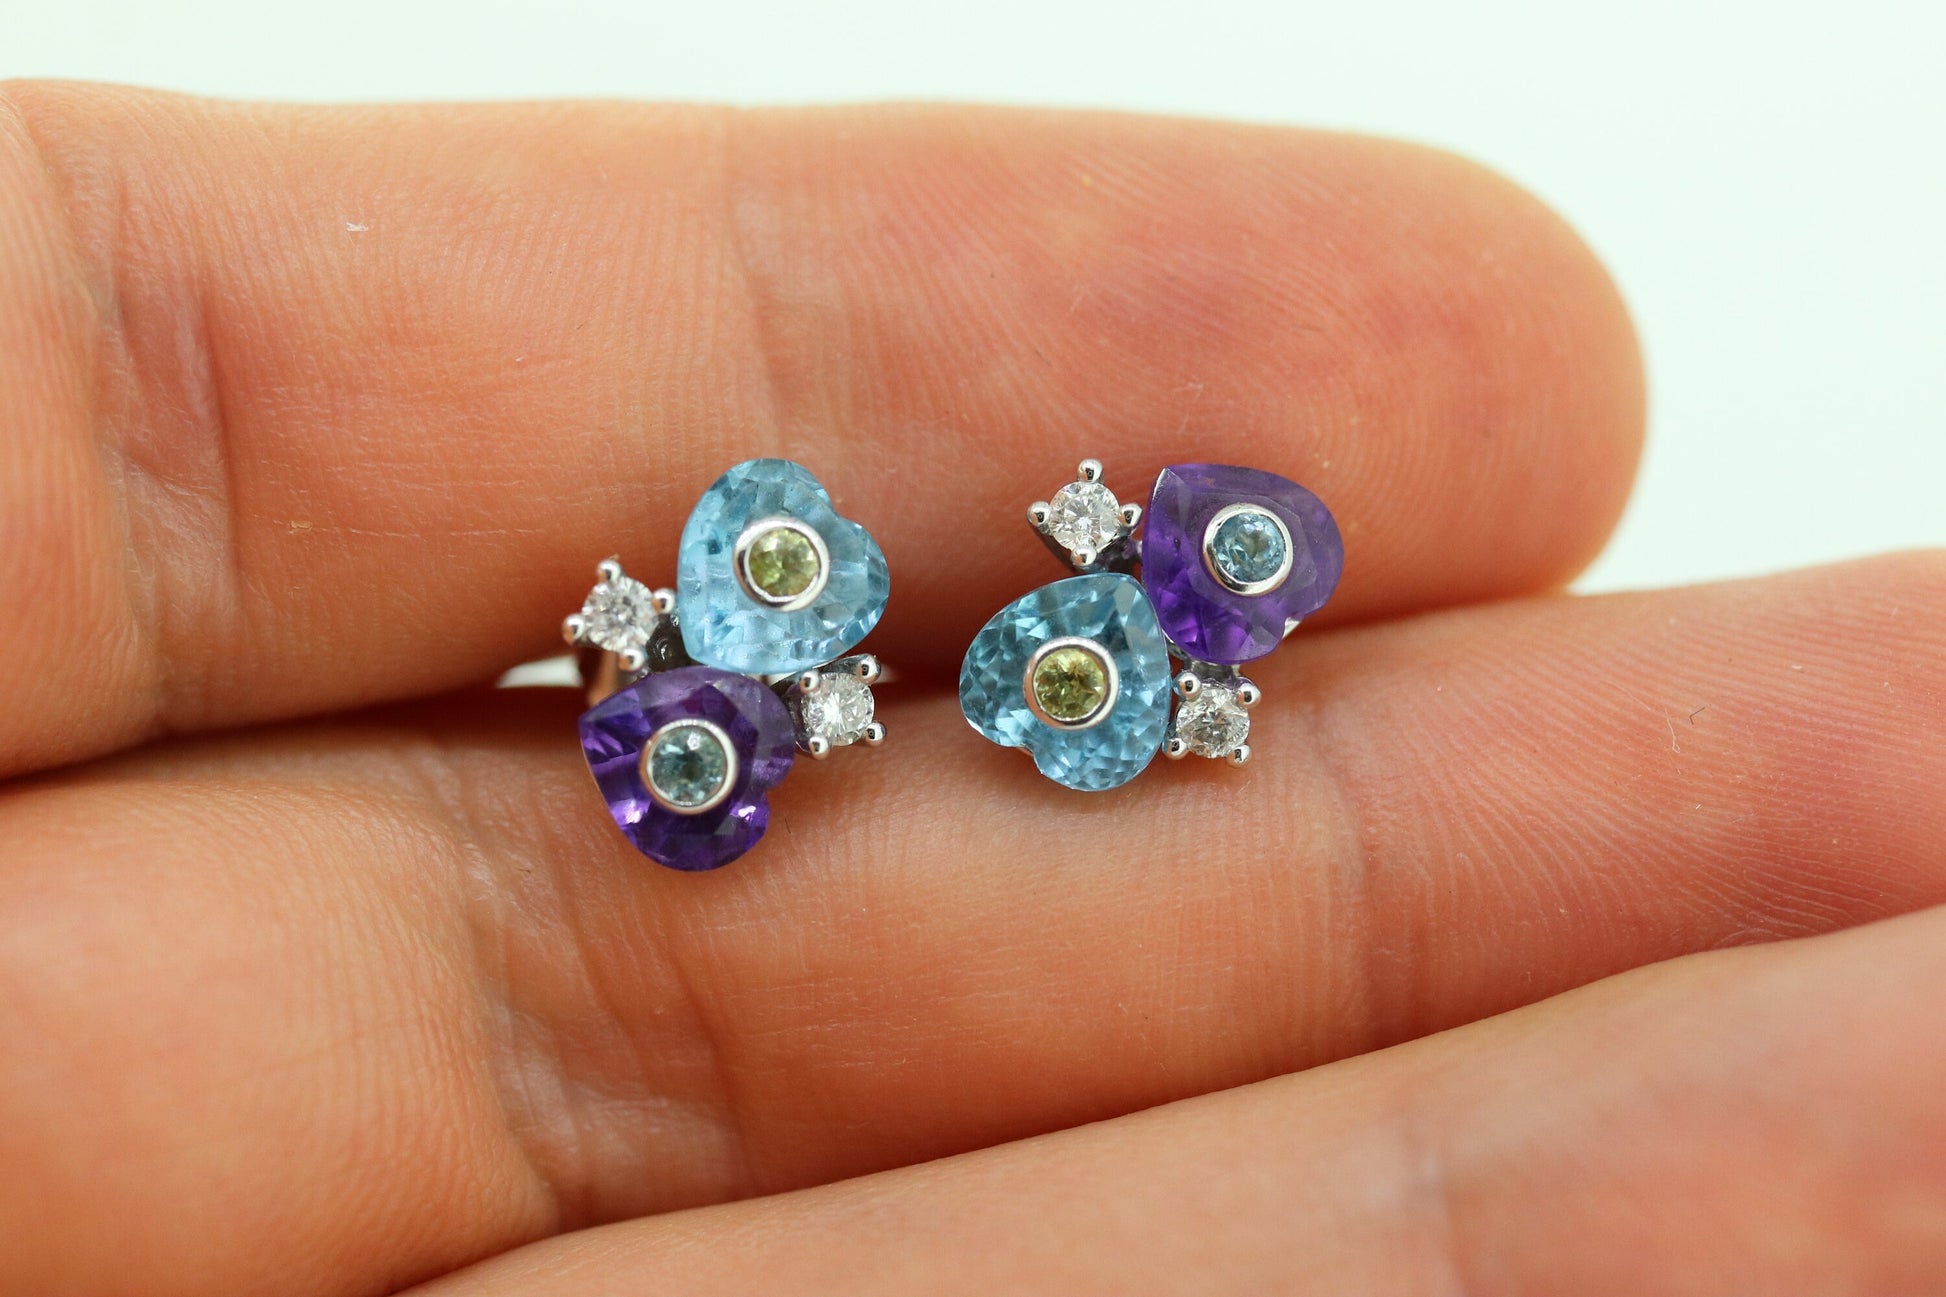 14k Amethyst and Topaz hearts and diamond stud earrings. Fun colorful earrings. st(92)